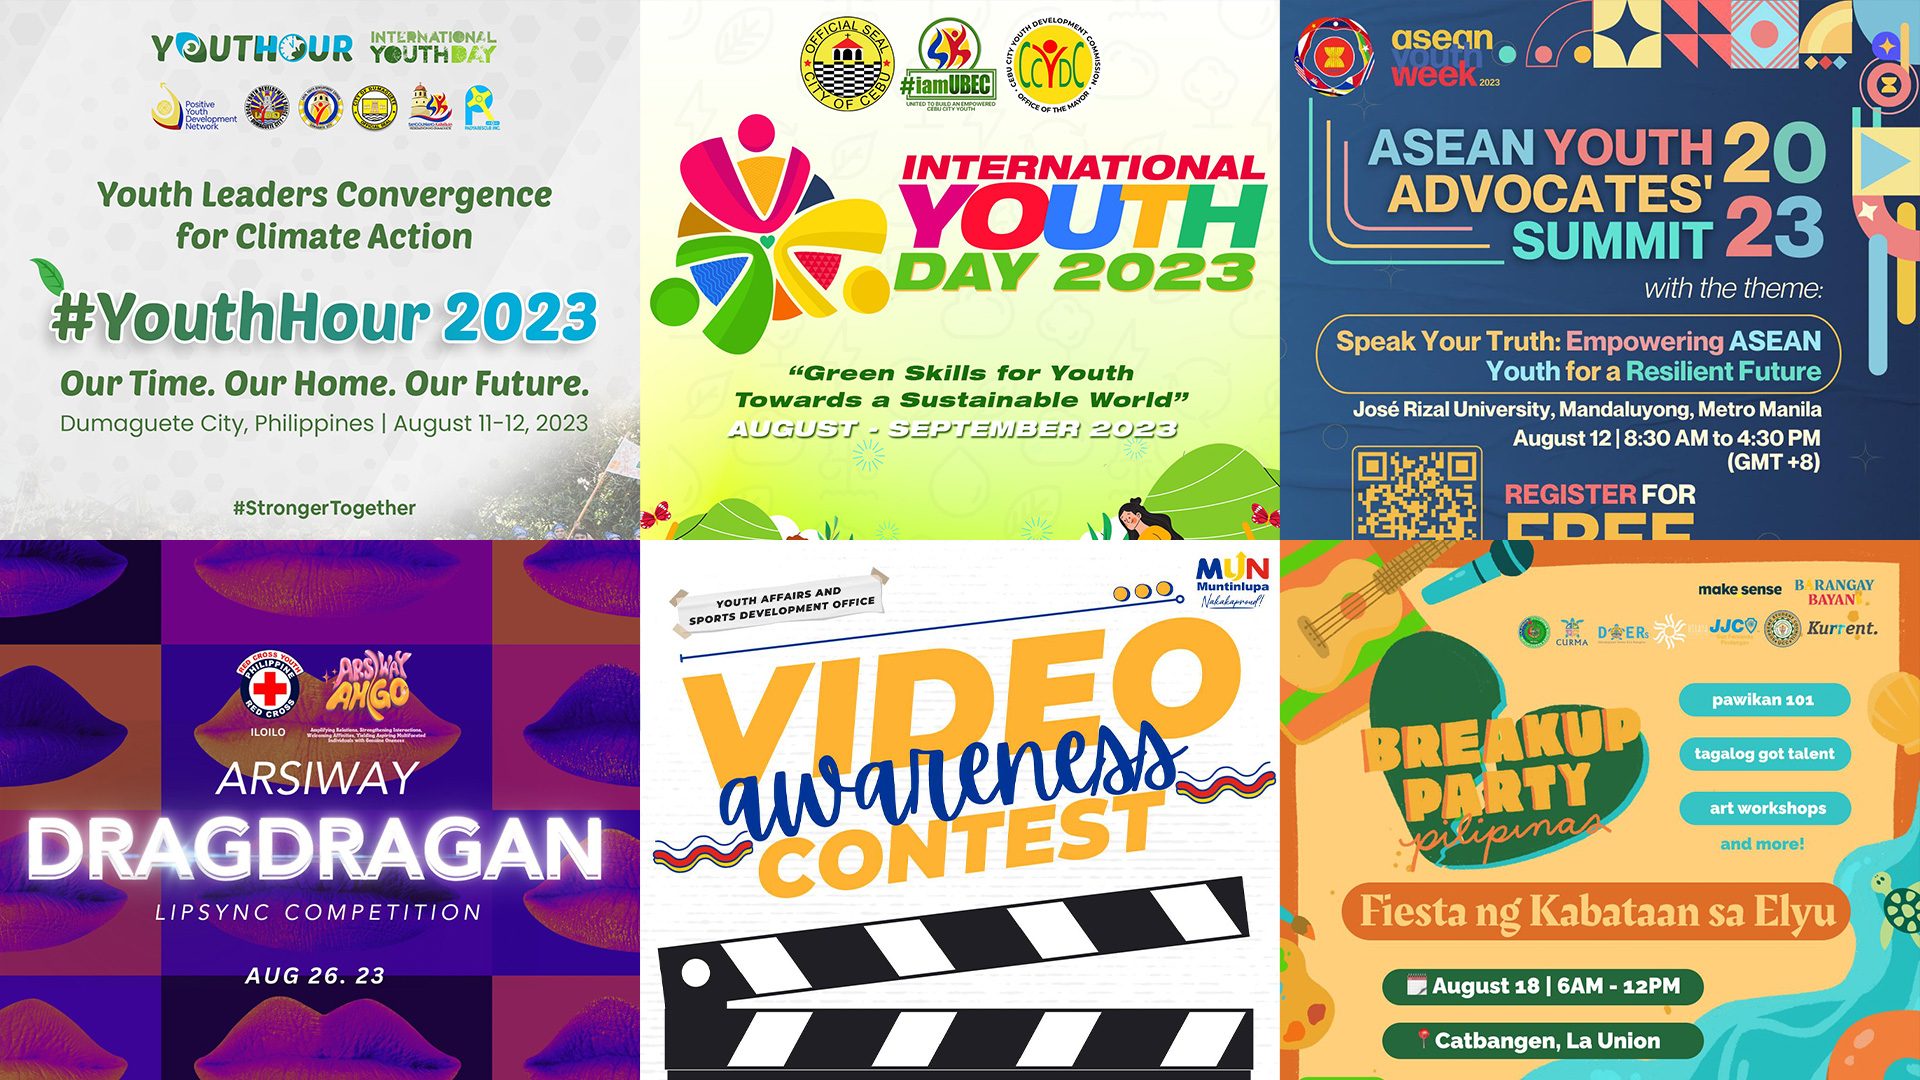 LIST: Go green with these International Youth Day 2023 activities